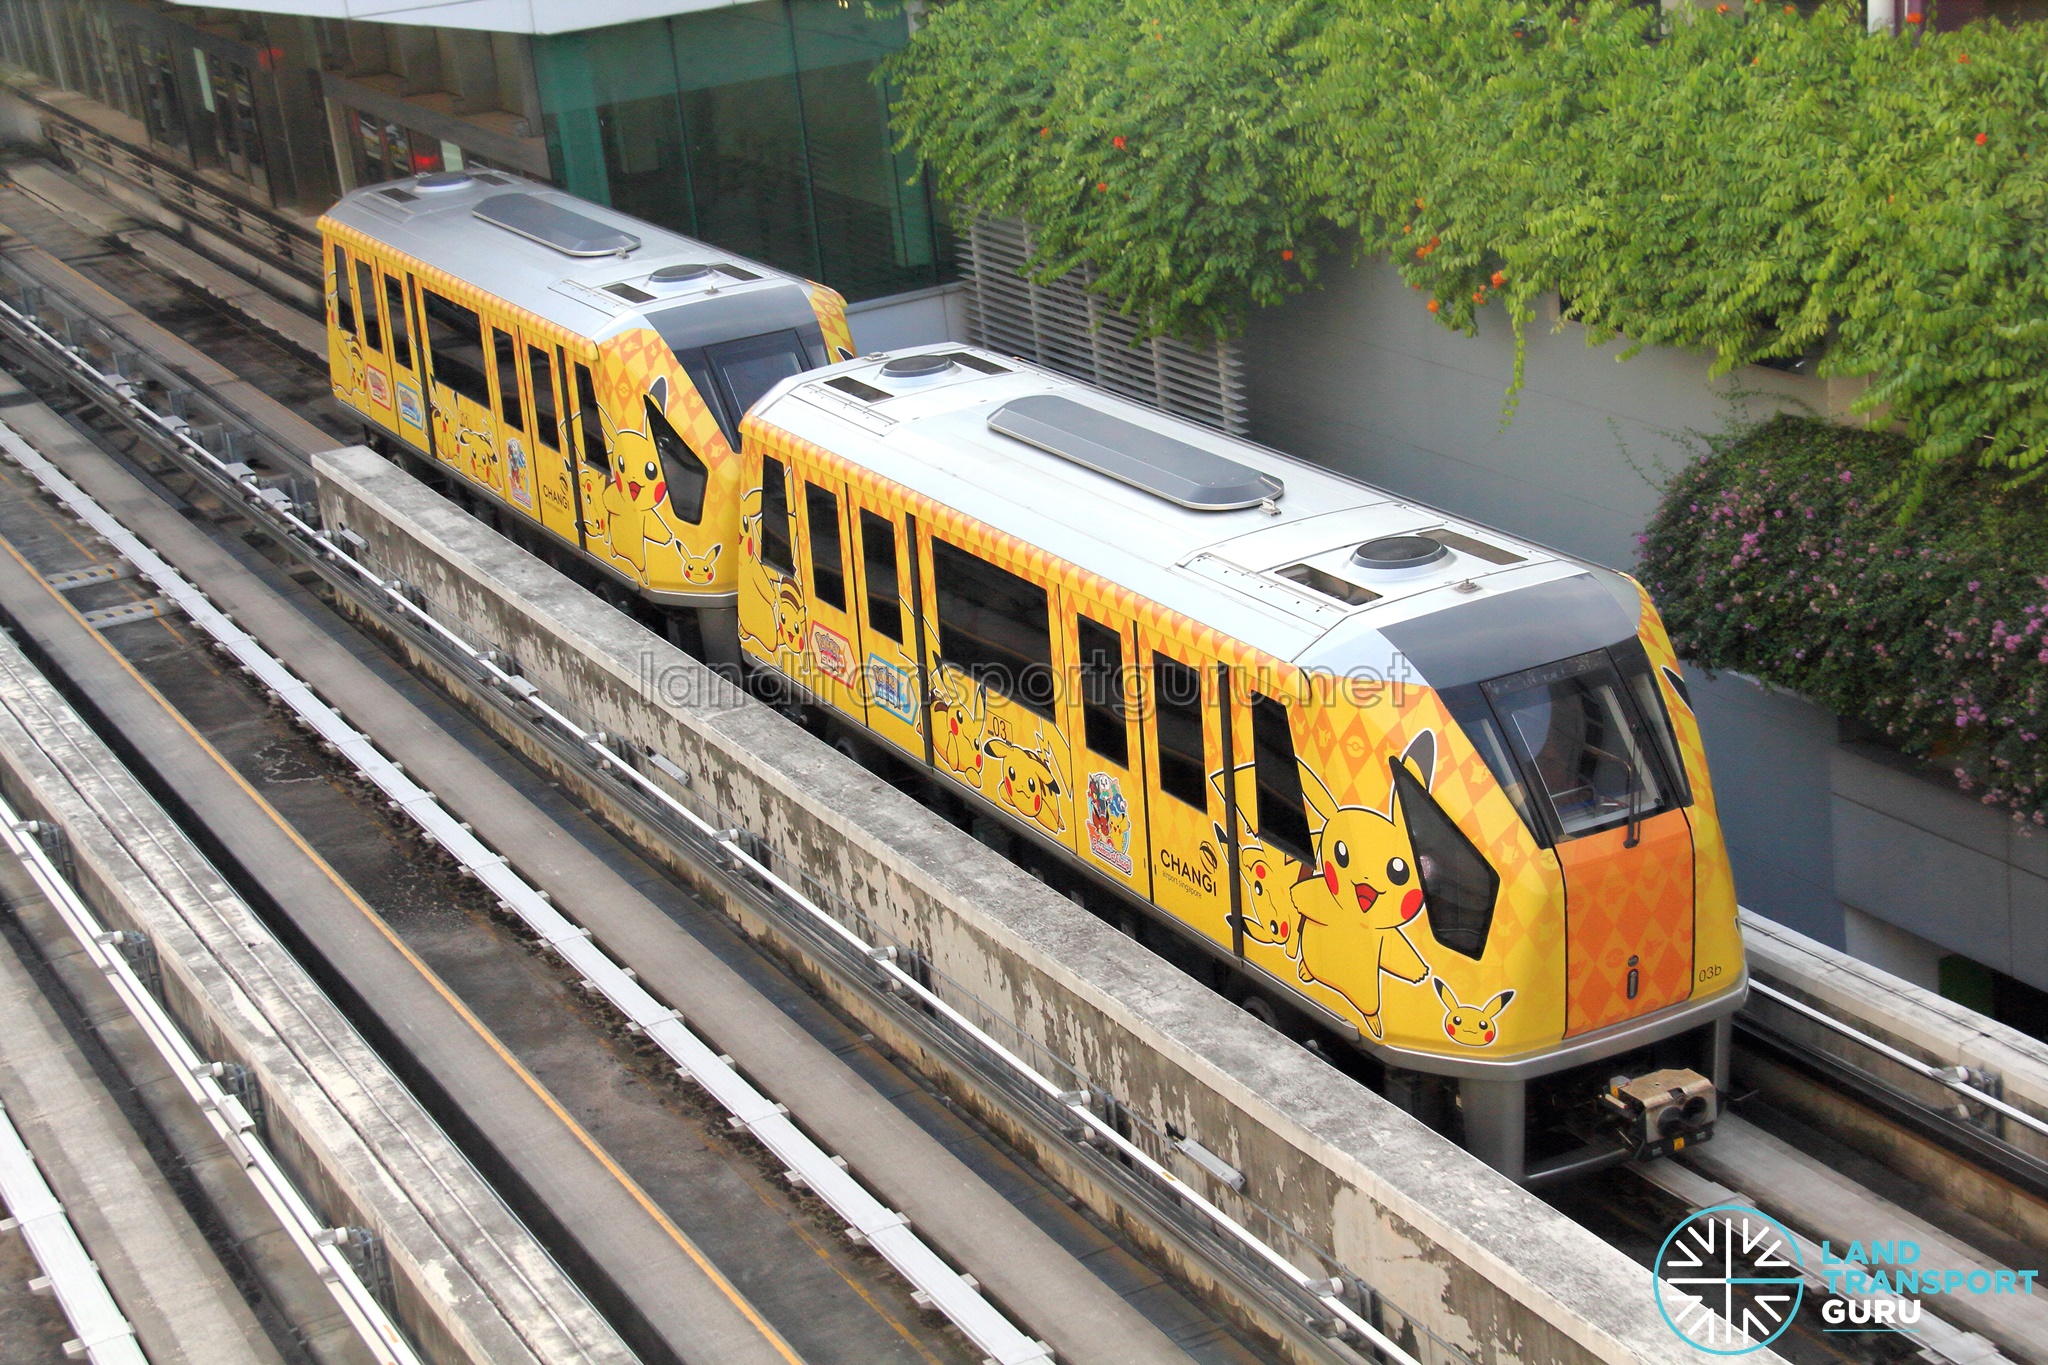 Changi Airport Skytrain (Double-car) in a Pokemon-themed livery